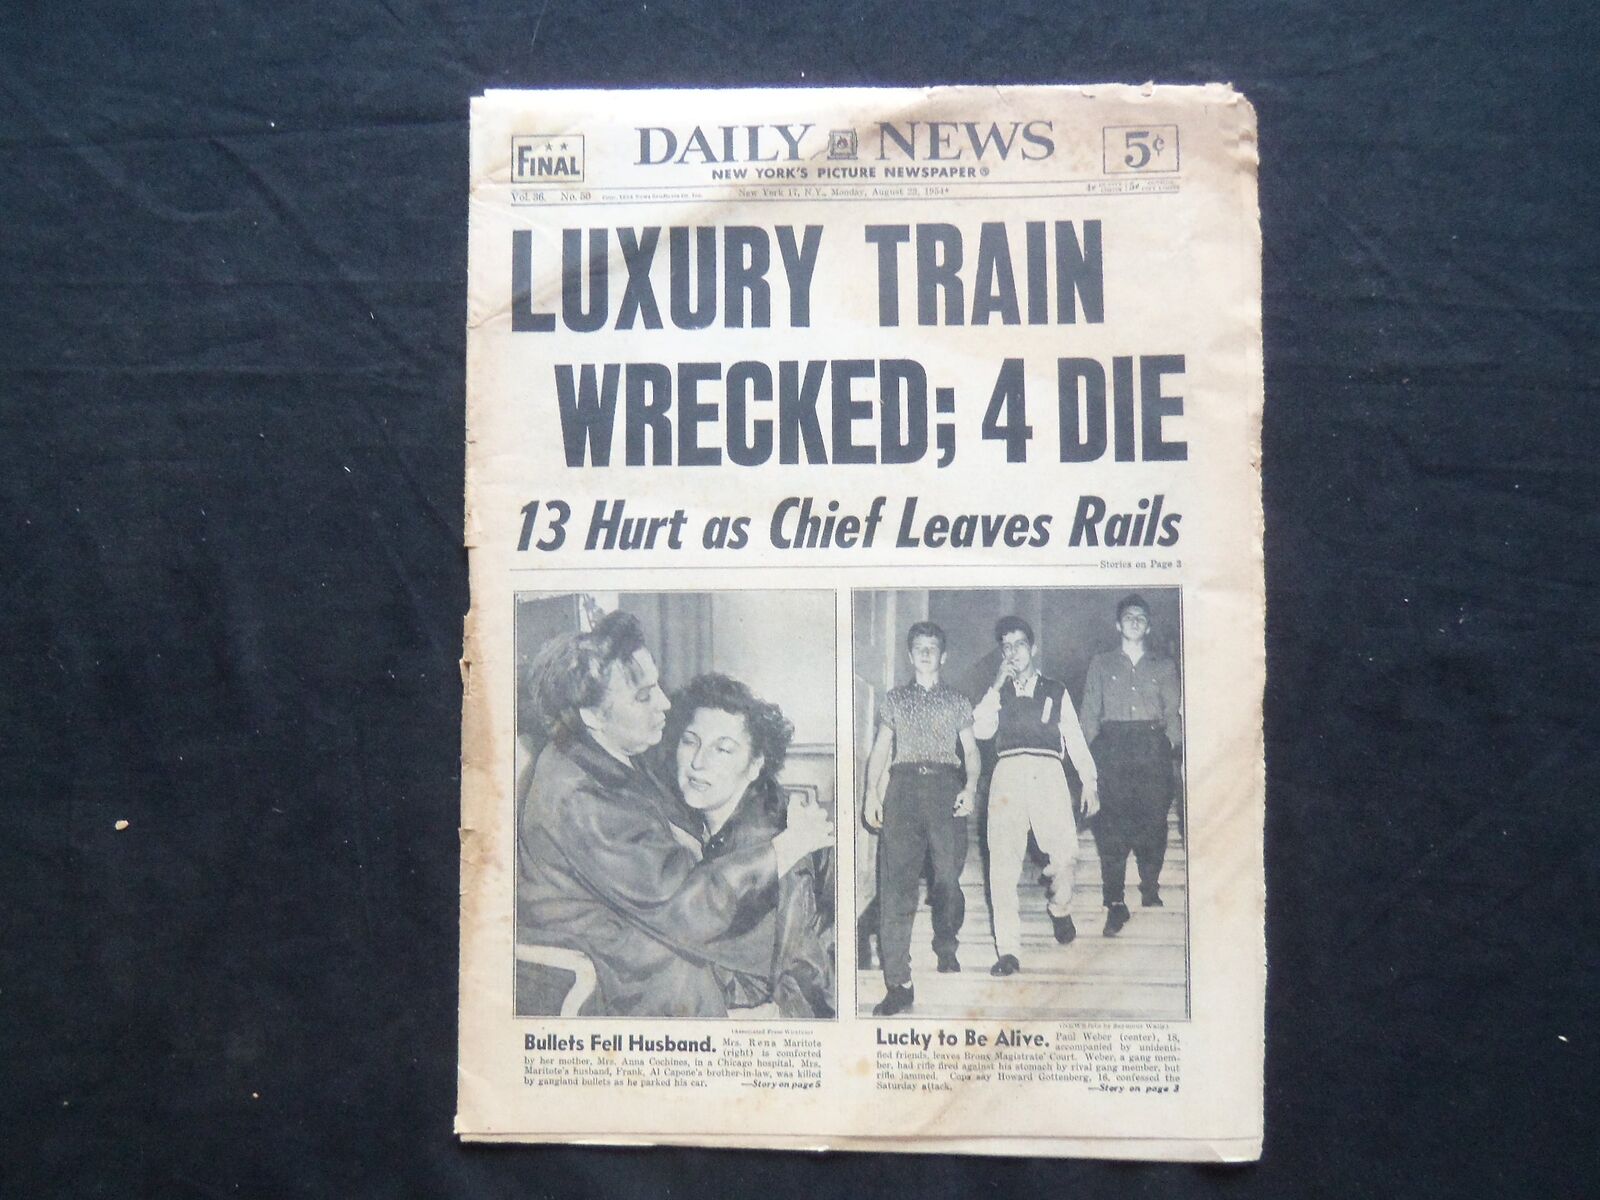 1954 AUGUST 23 NY DAILY NEWS NEWSPAPER - LUXURY TRAIN WRECKED; 4 DIE - NP 2520